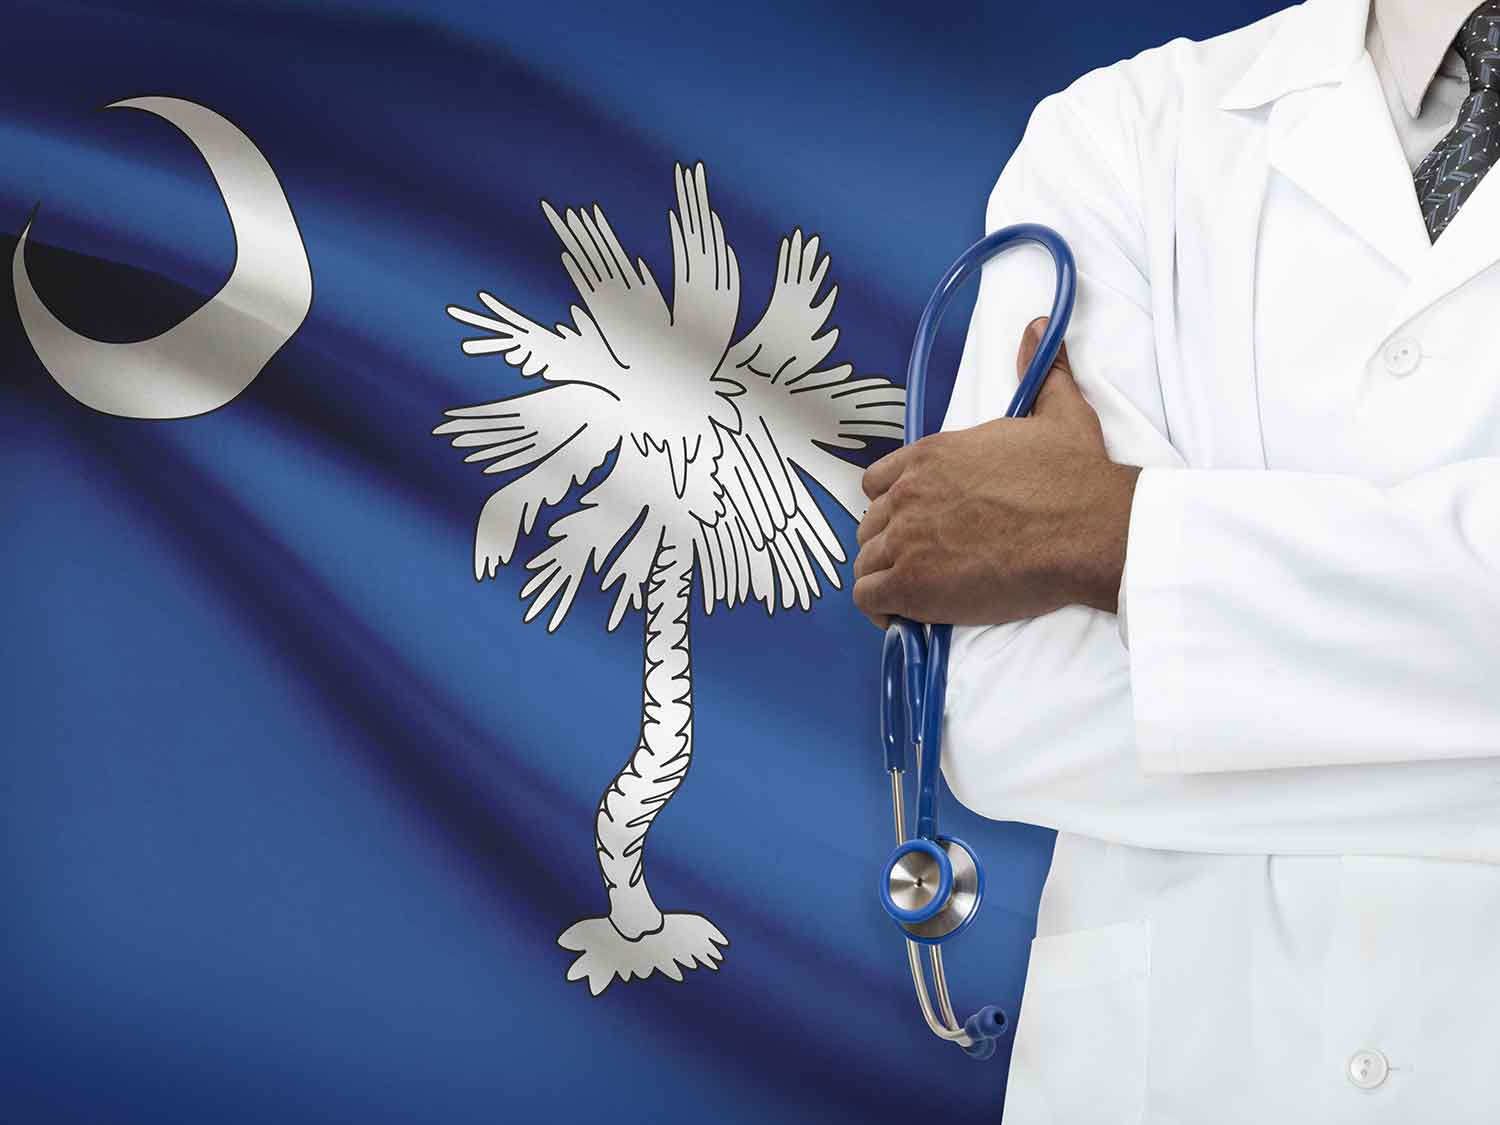 A Doctor With A Medical Malpractice Insurance Policy From MEDPLI Standing In Front Of The South Carolina Flag